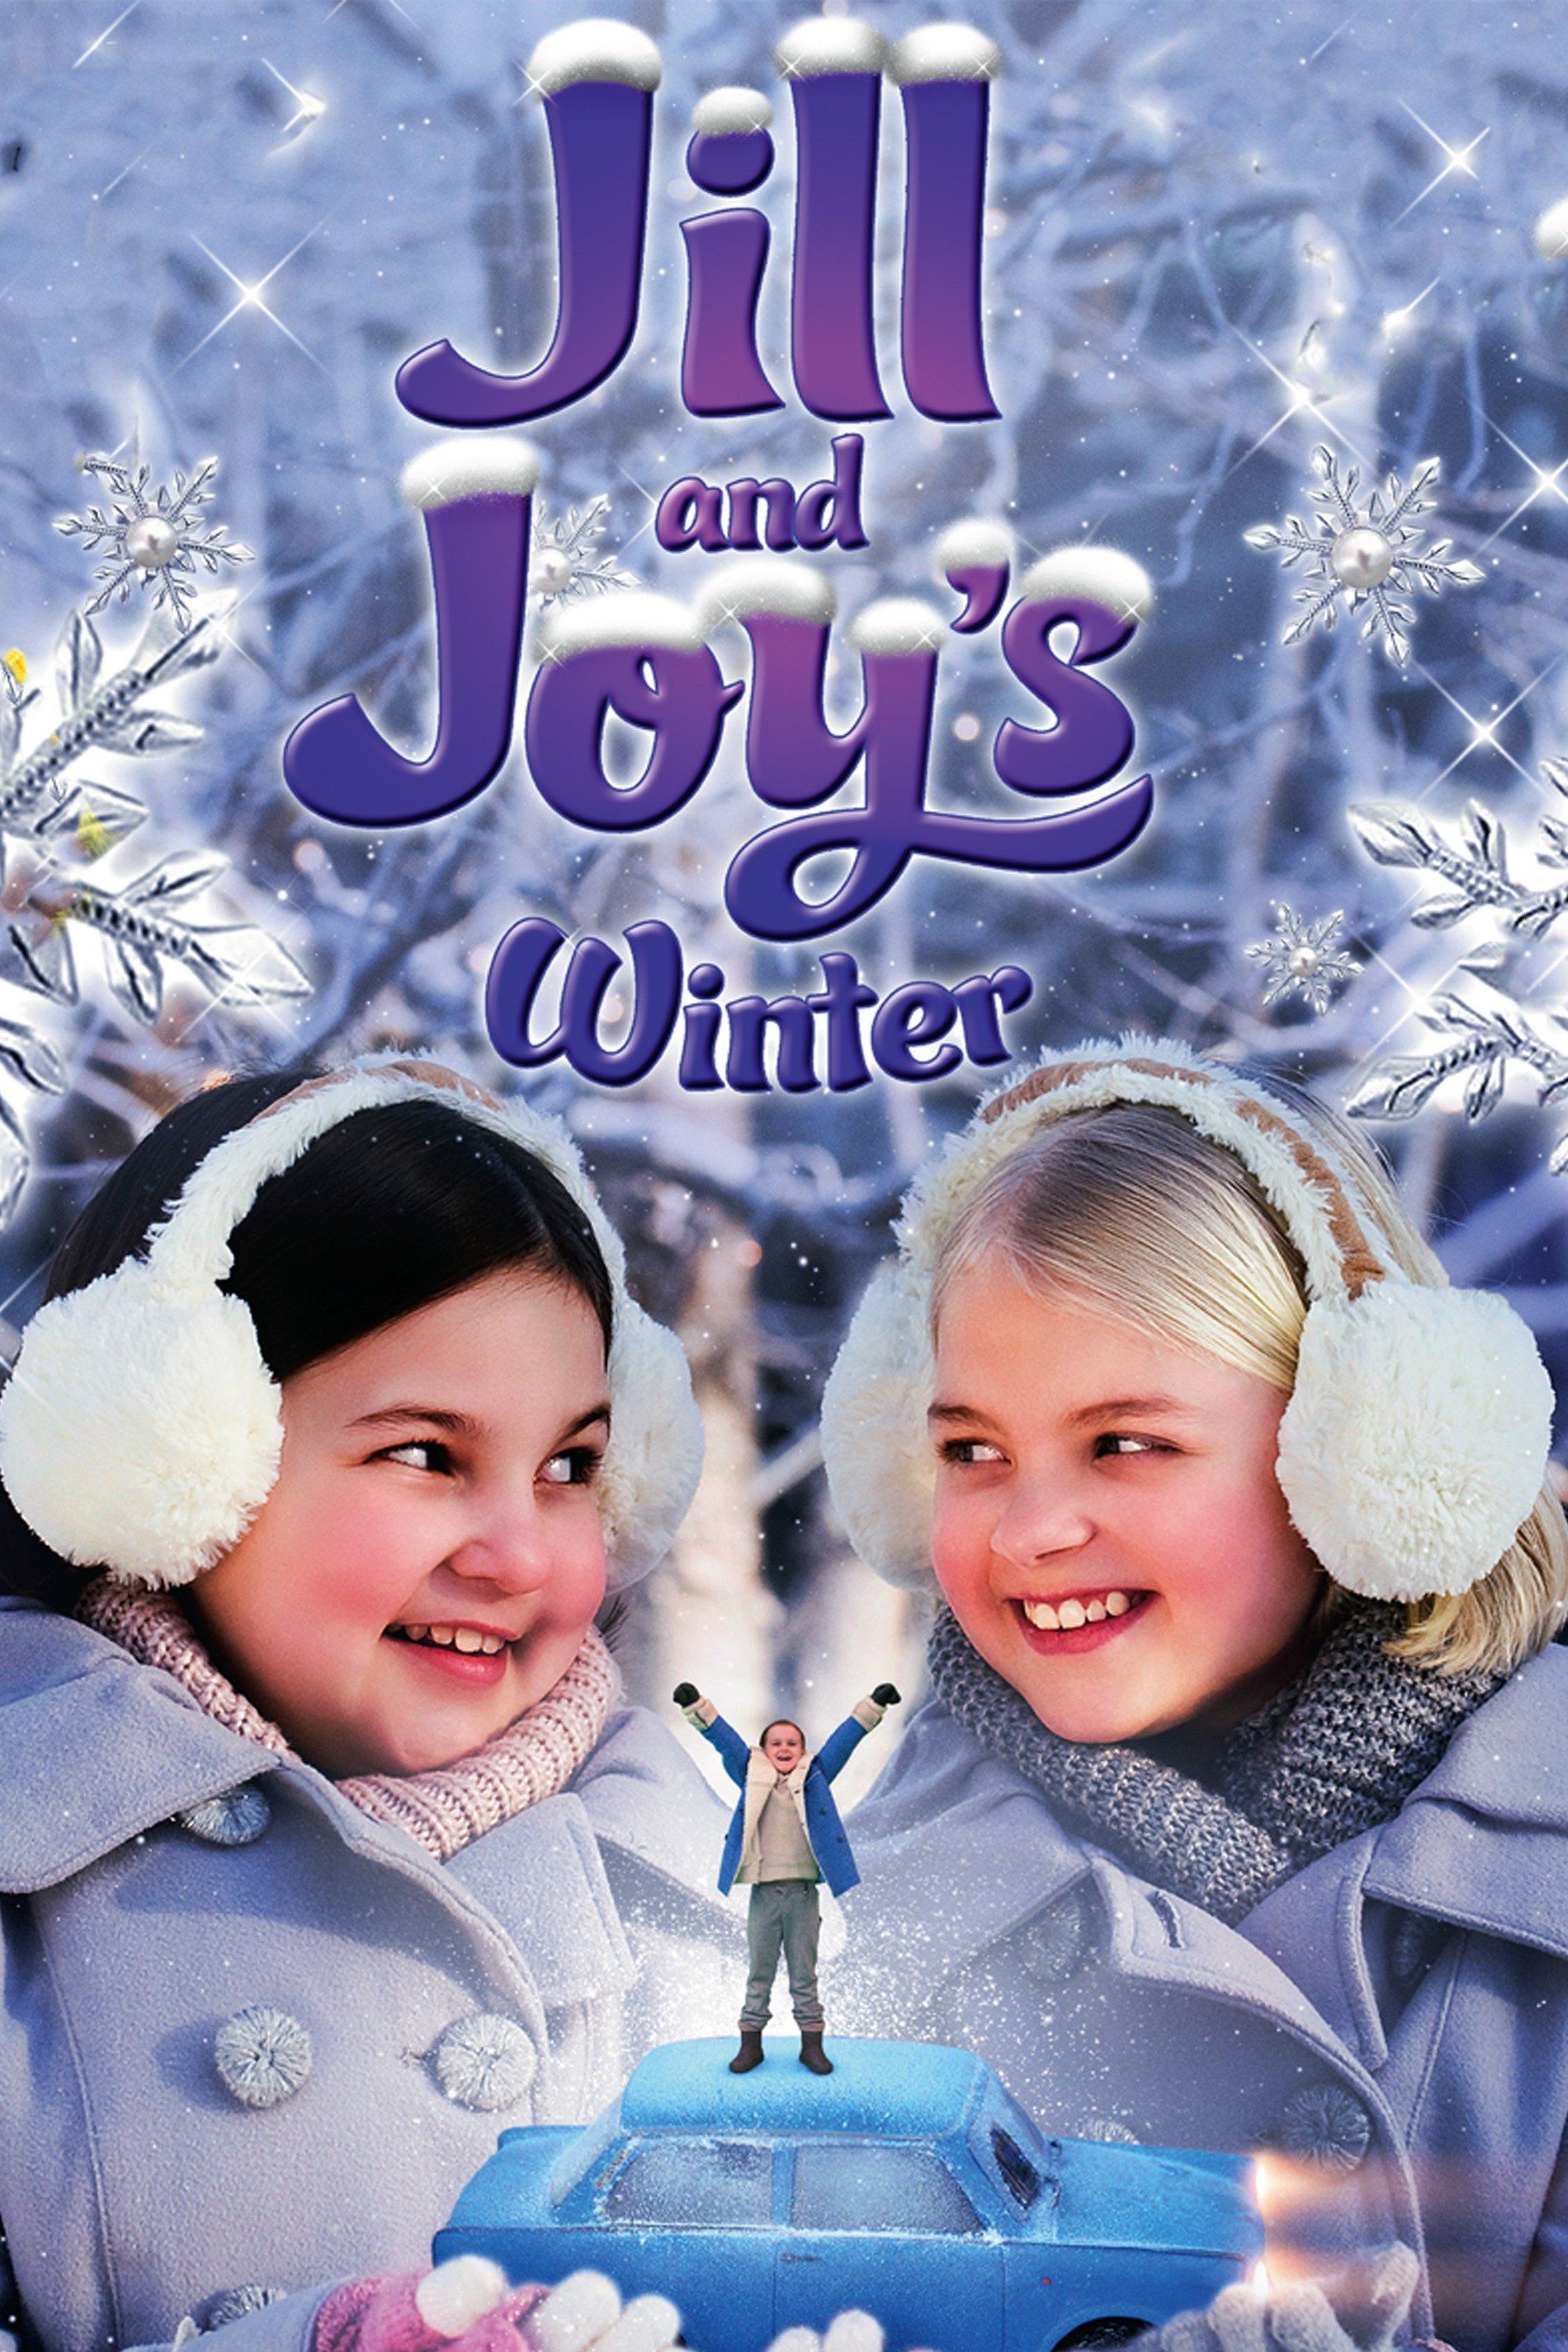 Jill and Joy's Winter streaming: where to watch online?